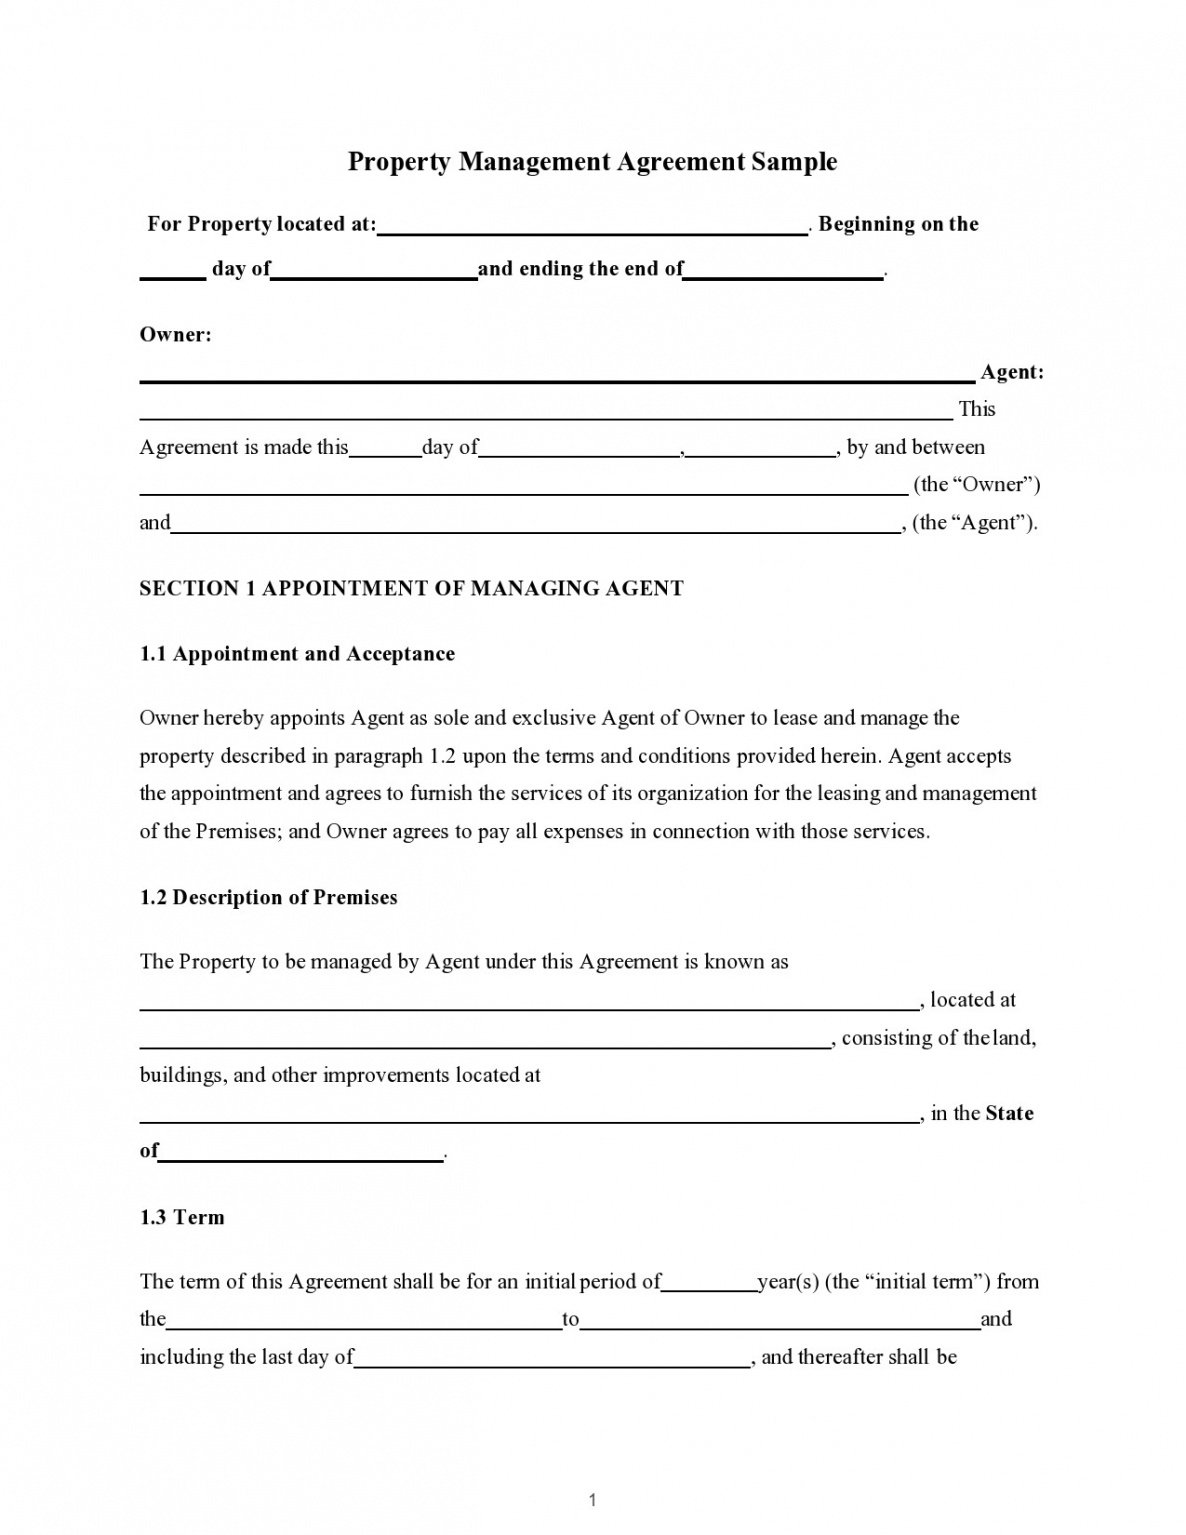 Costum Contract Management Plan Template Doc Example